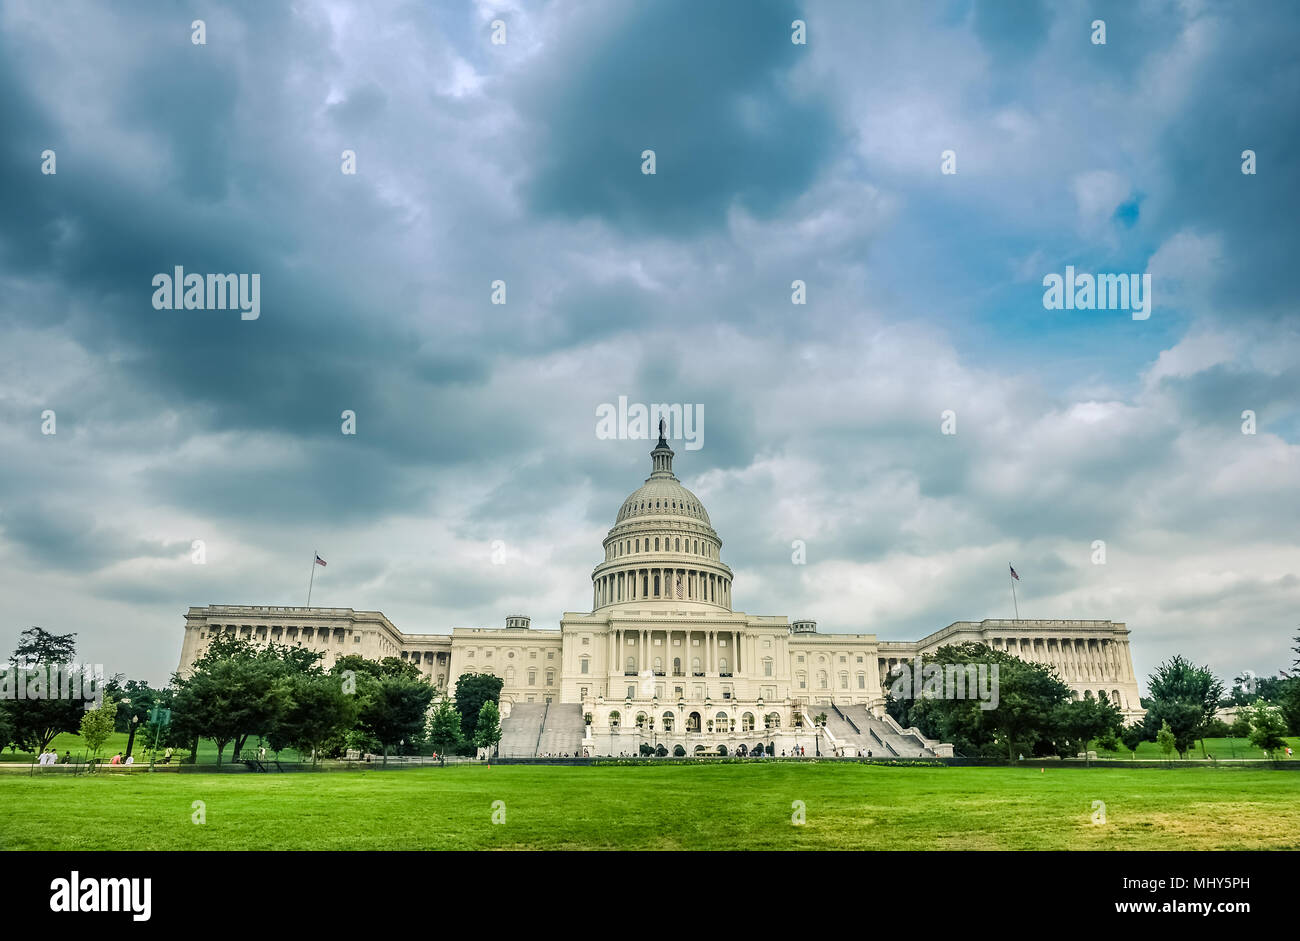 Capitol building in Washington D.C. stormy clouds above. Stock Photo